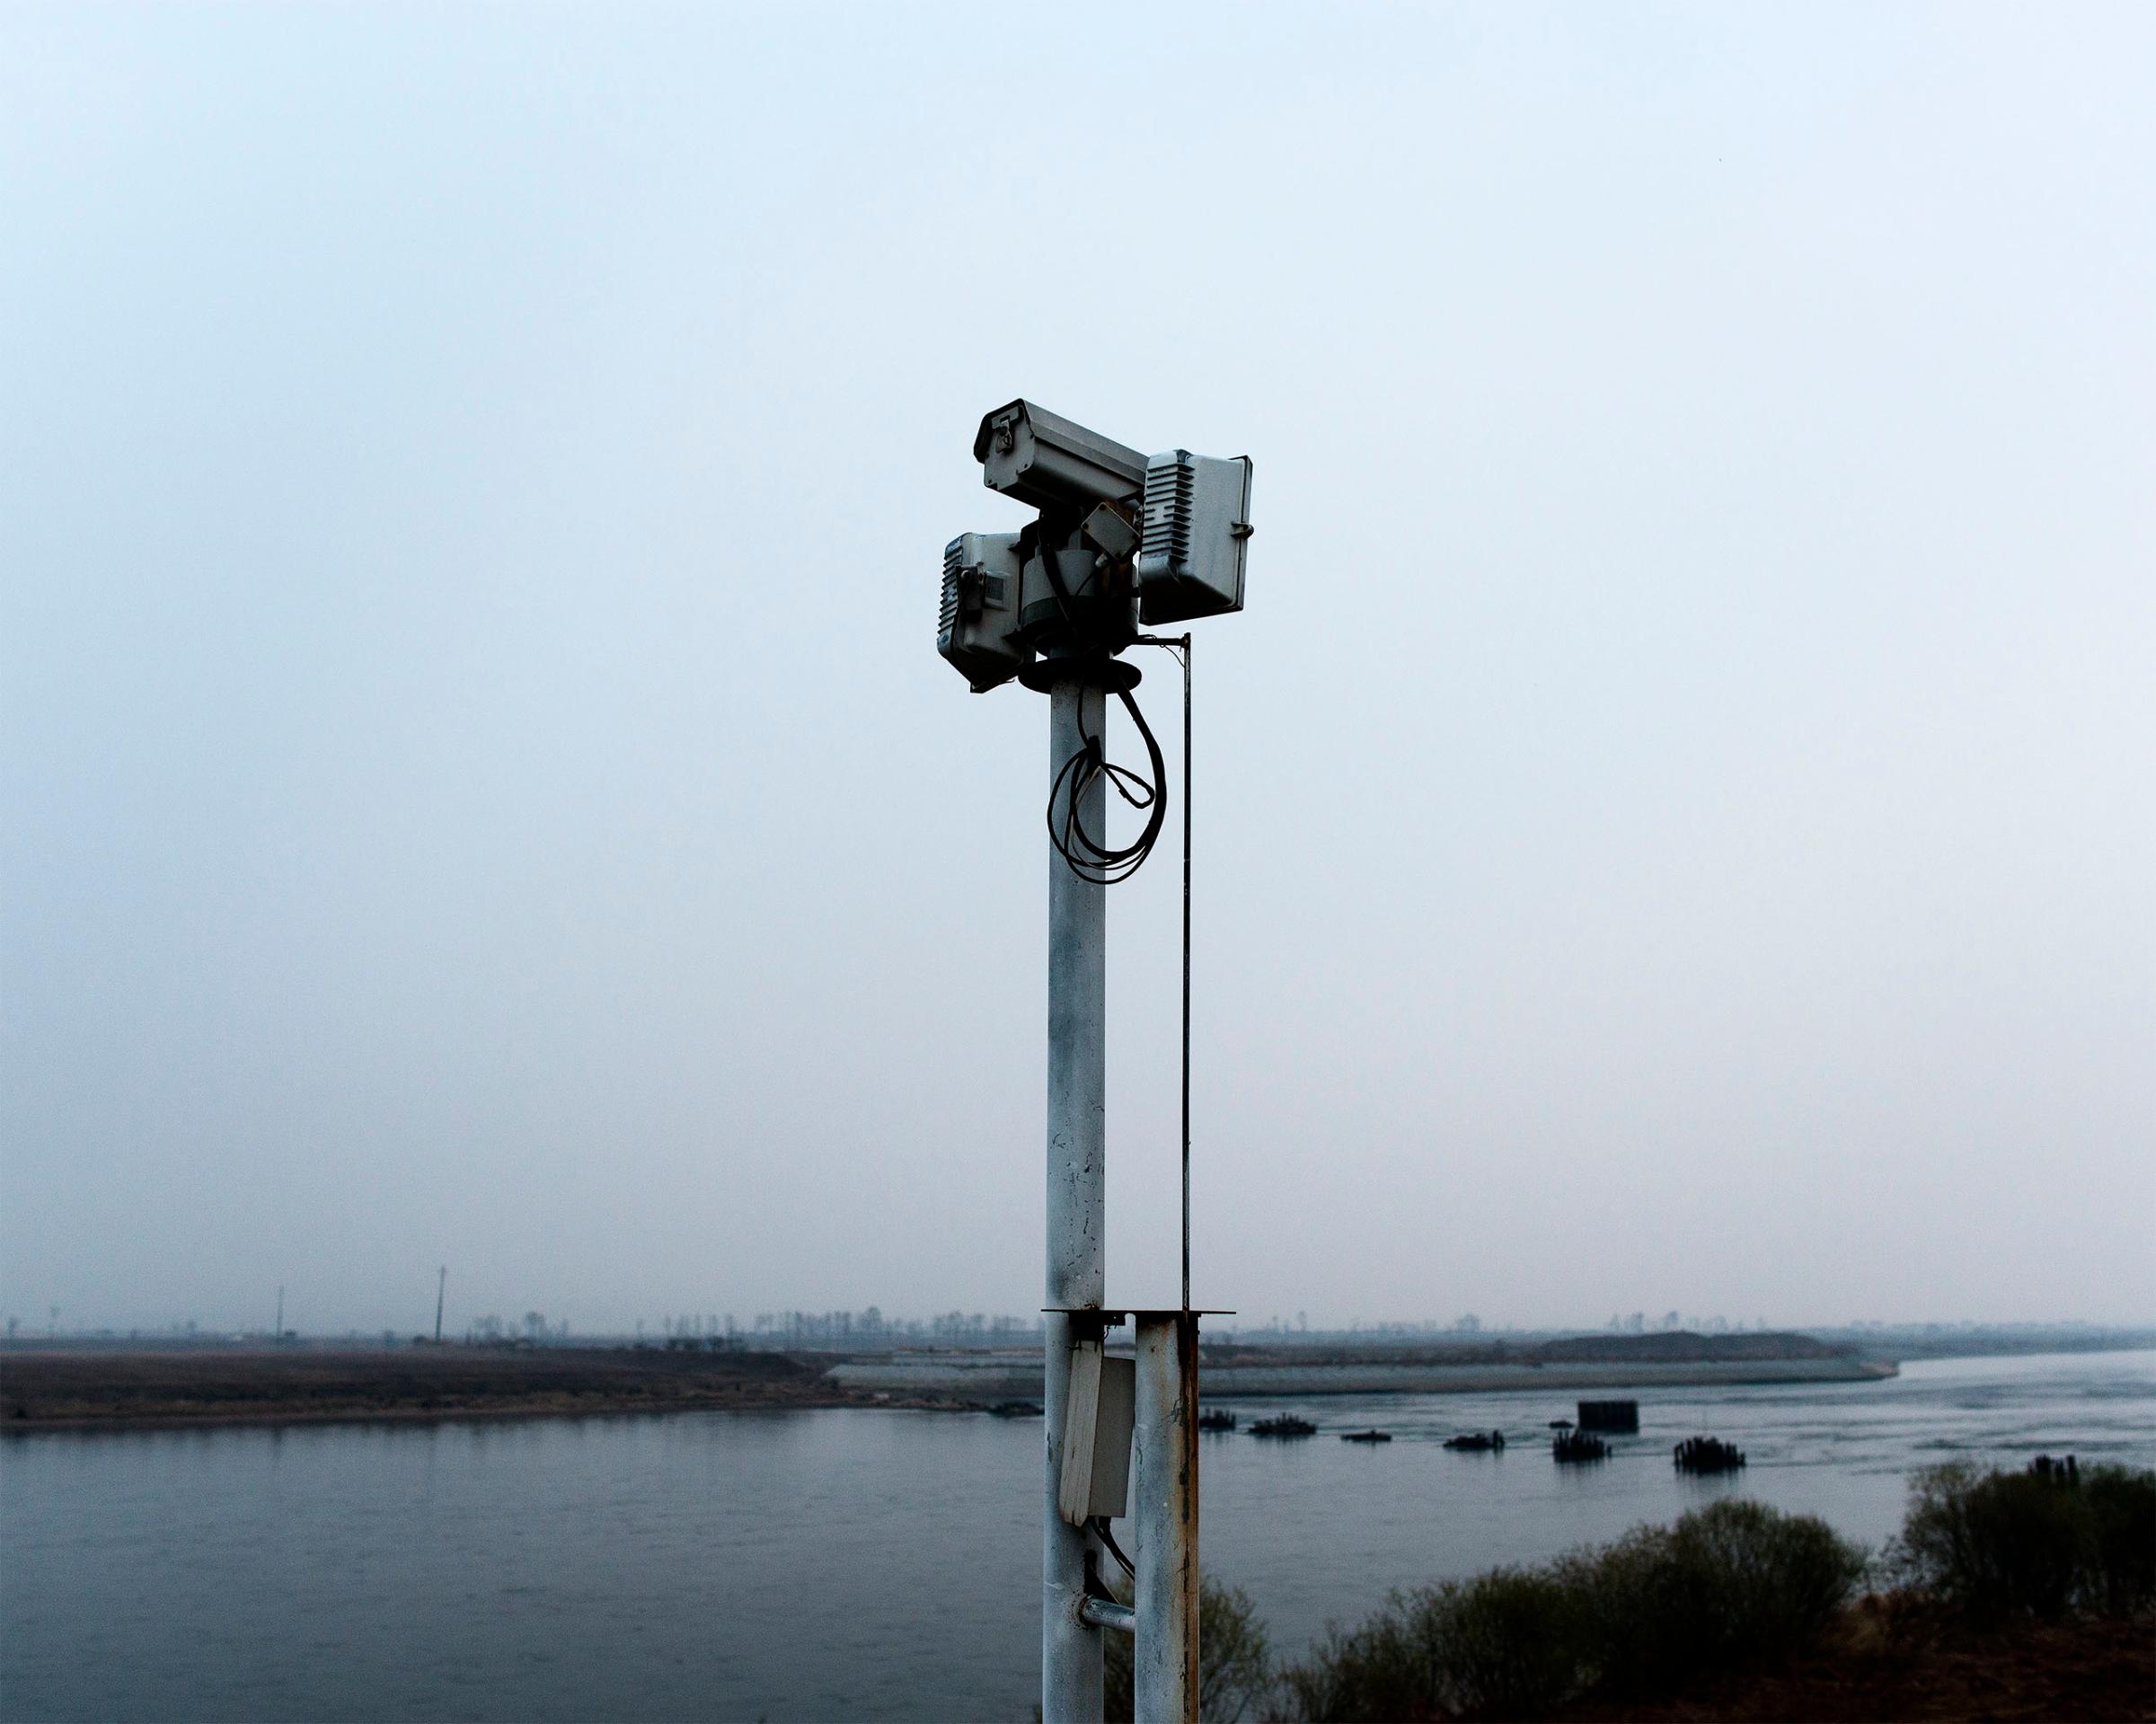 Security cameras in Dandong, China keep watch over a narrow stretch of the Yalu River that is sometimes crossed by North Korean defectors.